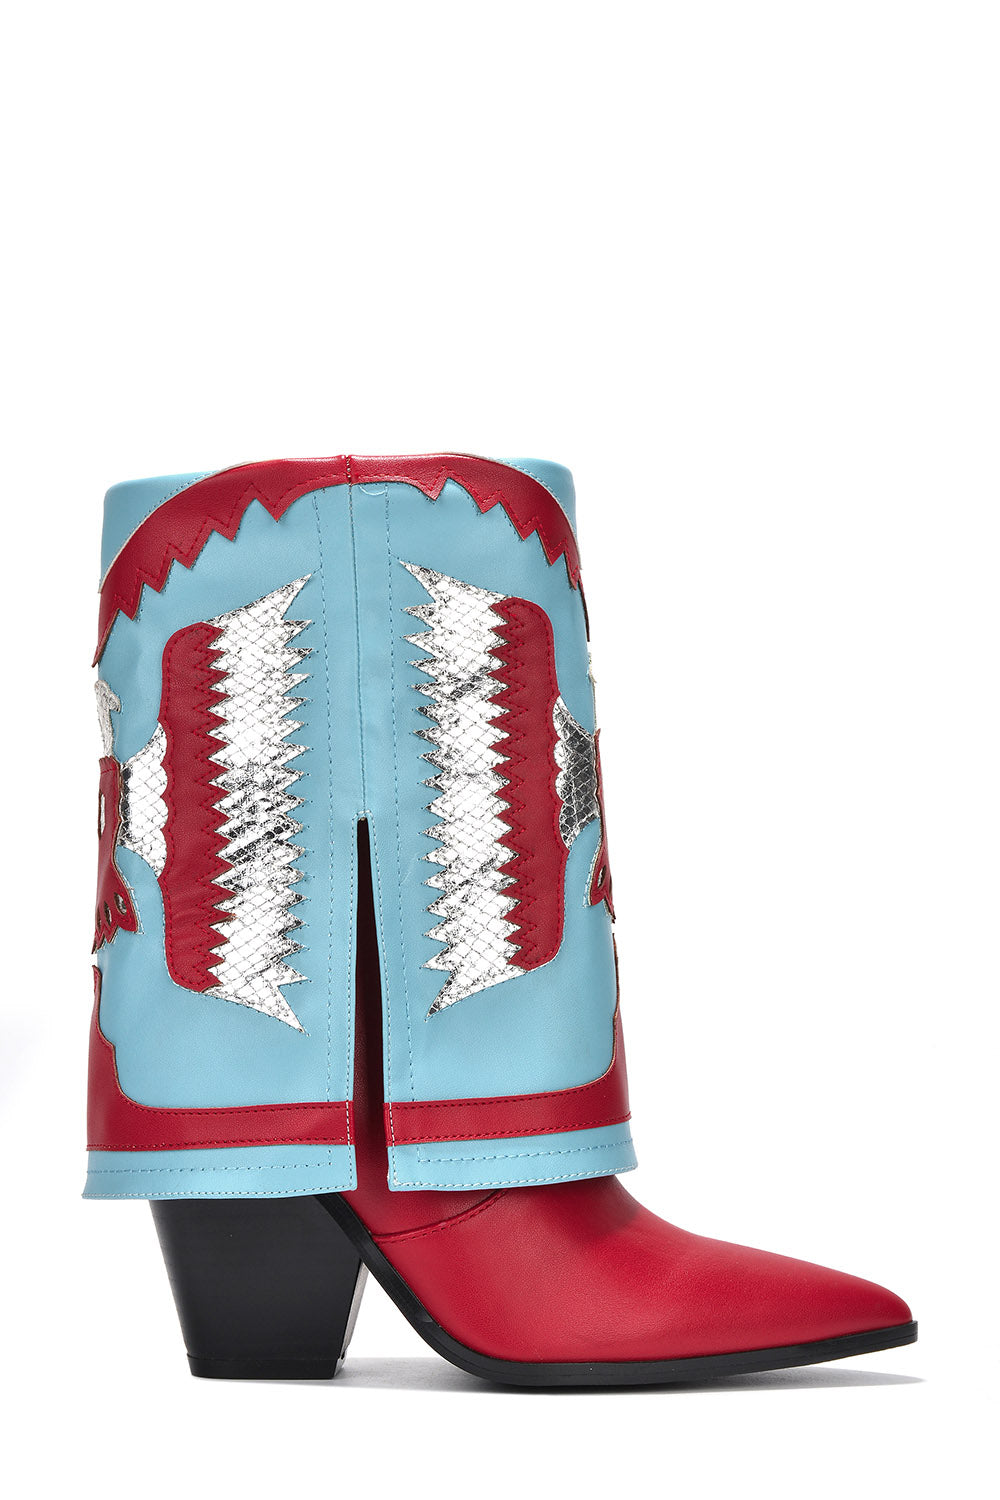 Cape Robbin - HUMBLE - RED - BOOTIES